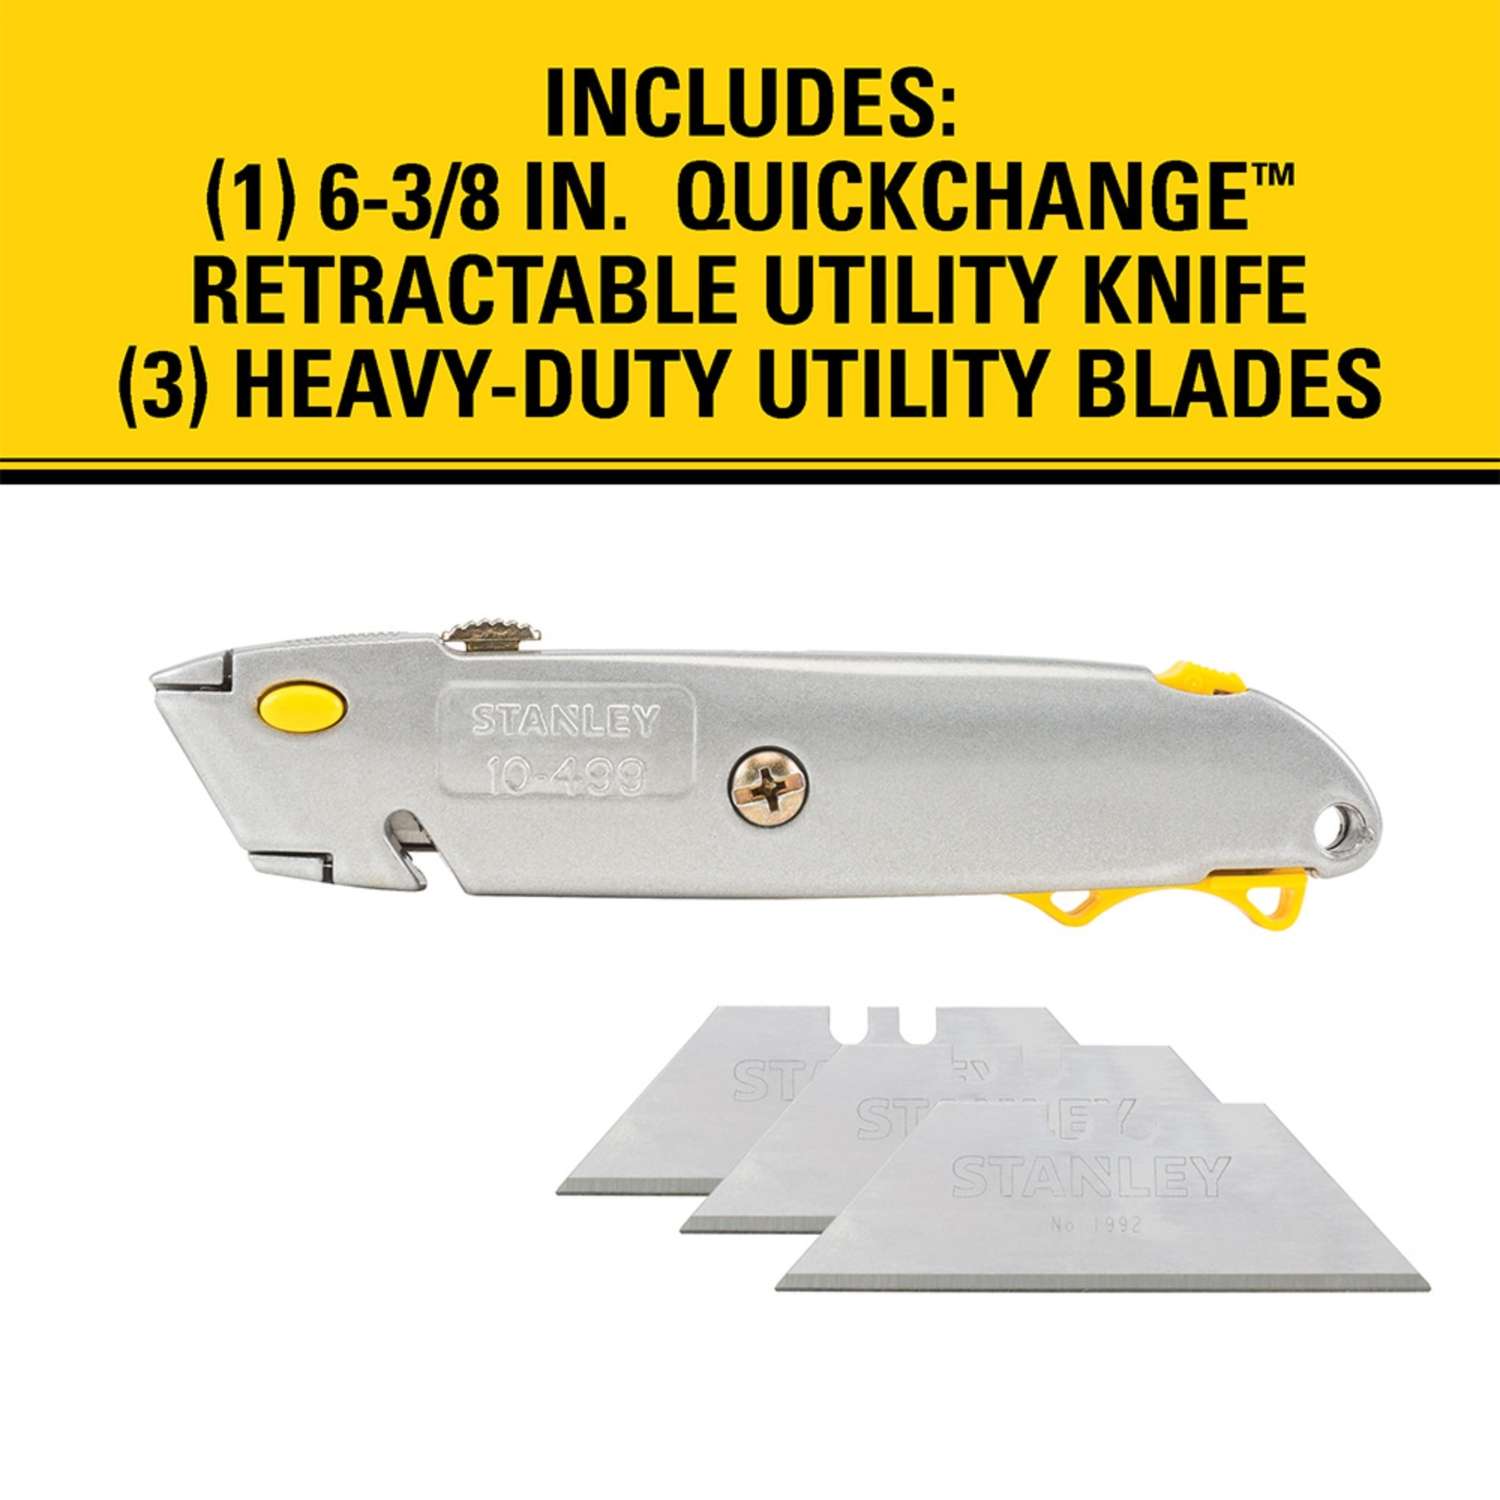 Stanley 10-499 Quick Change Utility Knife